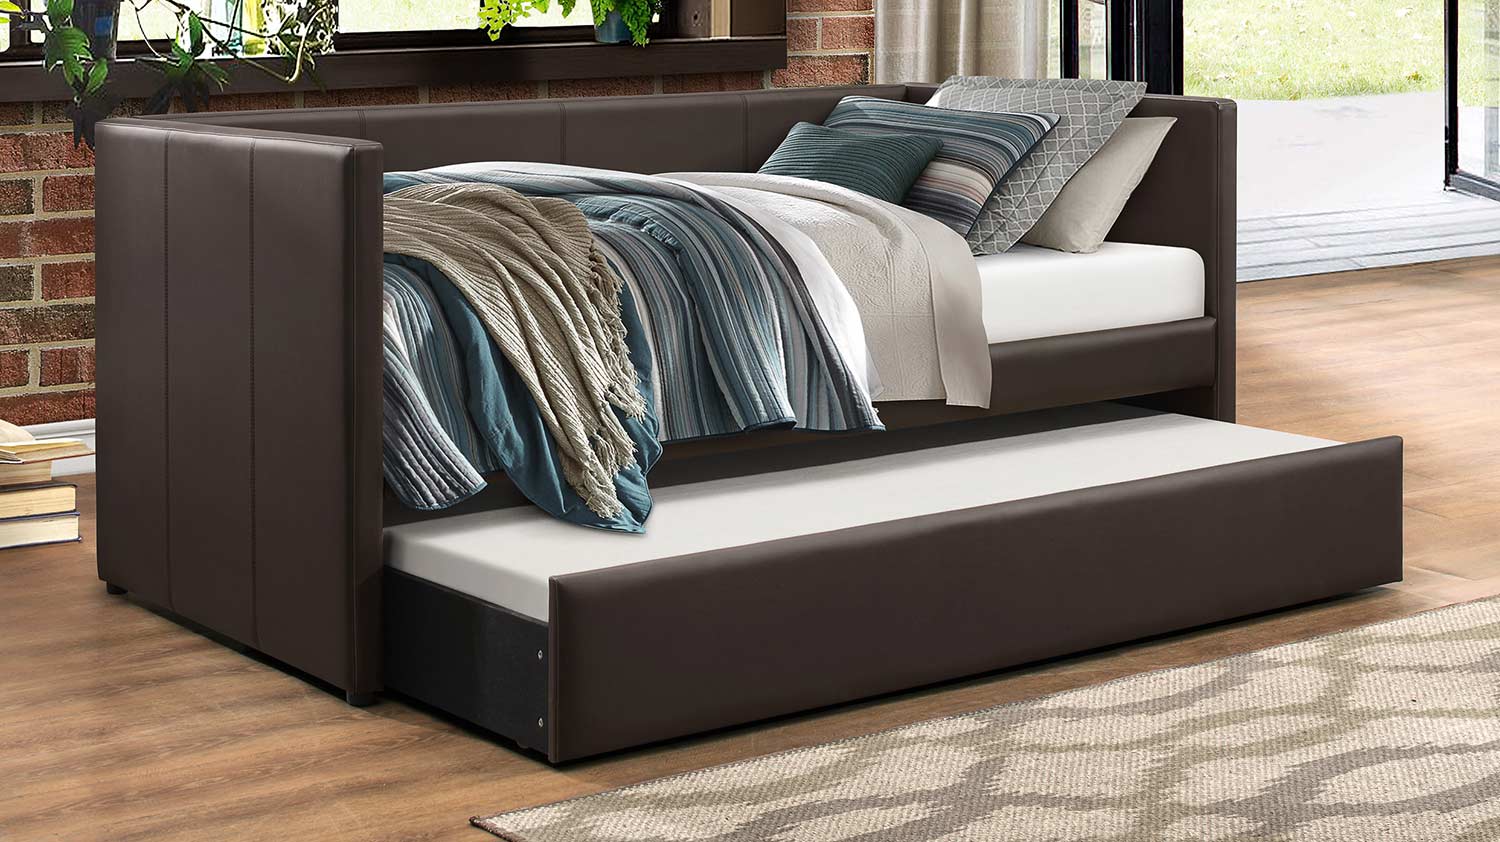 Homelegance Adra Daybed with Trundle - Dark Brown